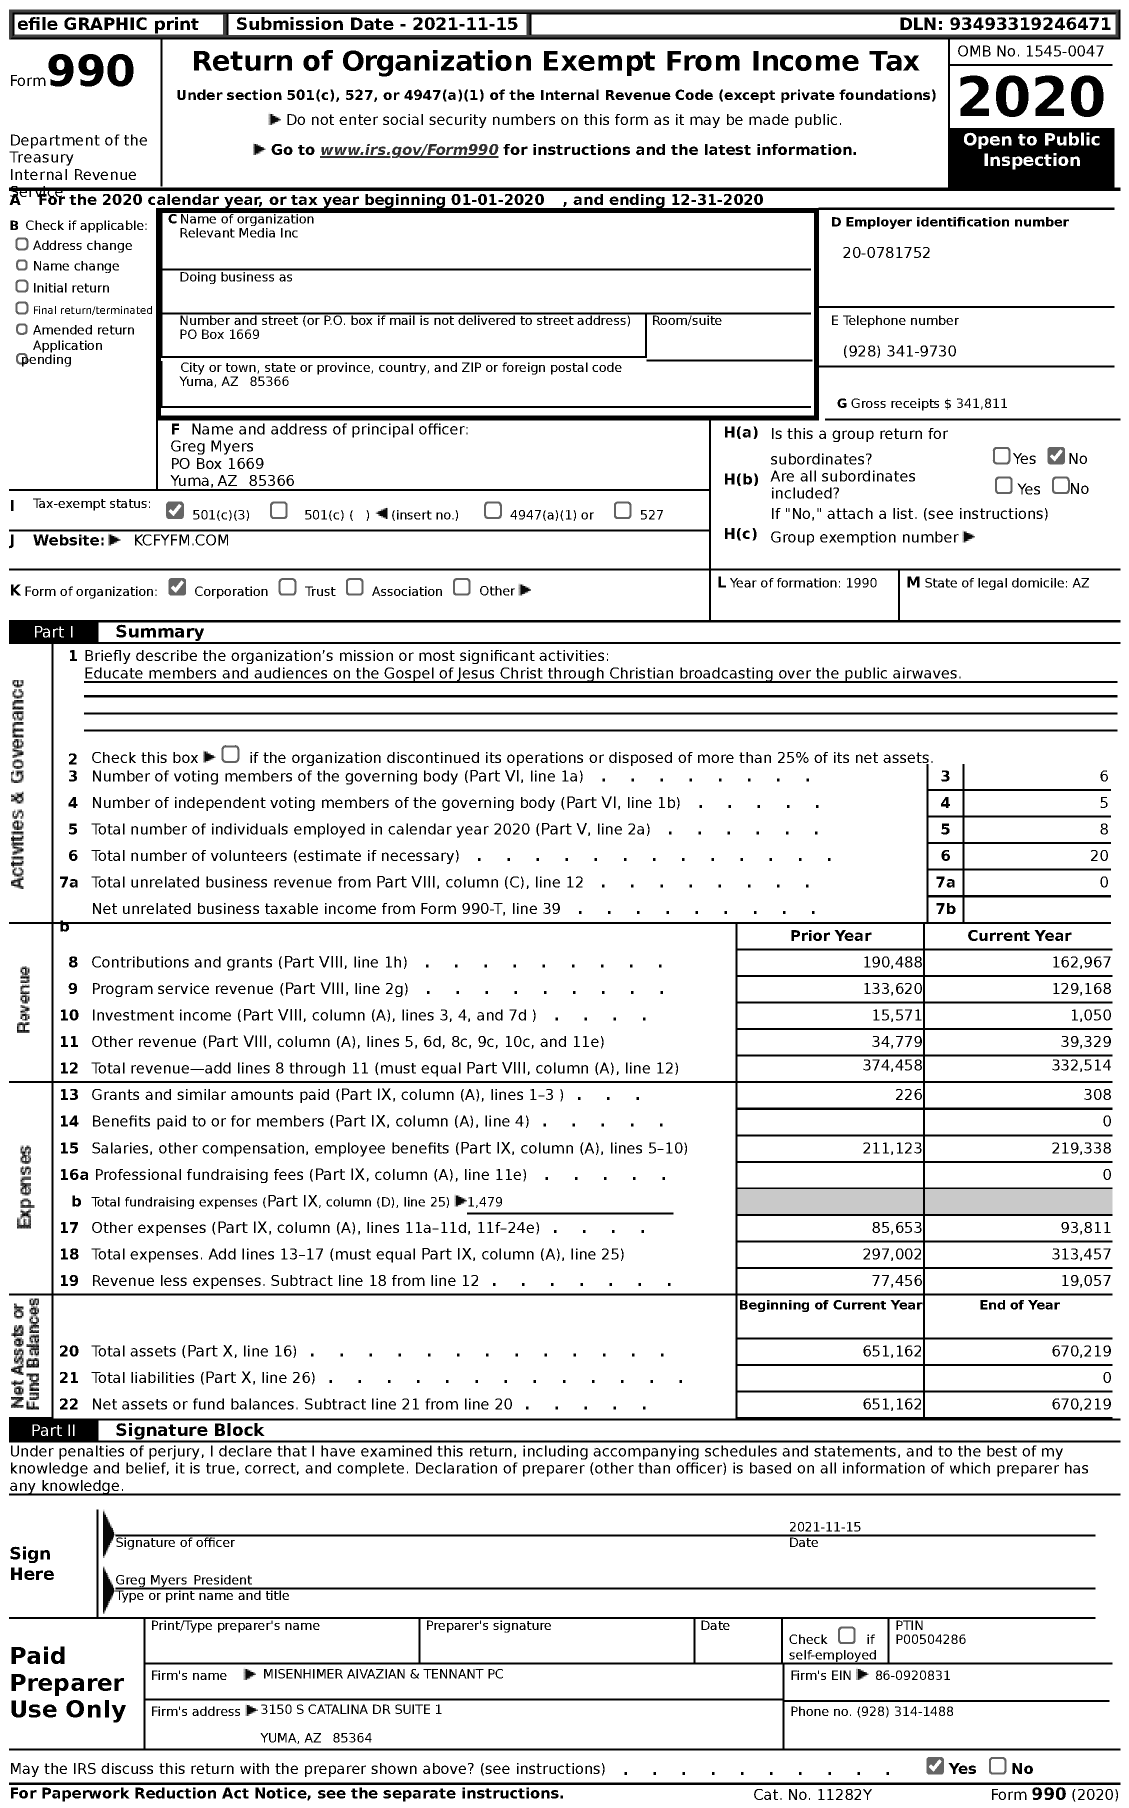 Image of first page of 2020 Form 990 for Relevant Media